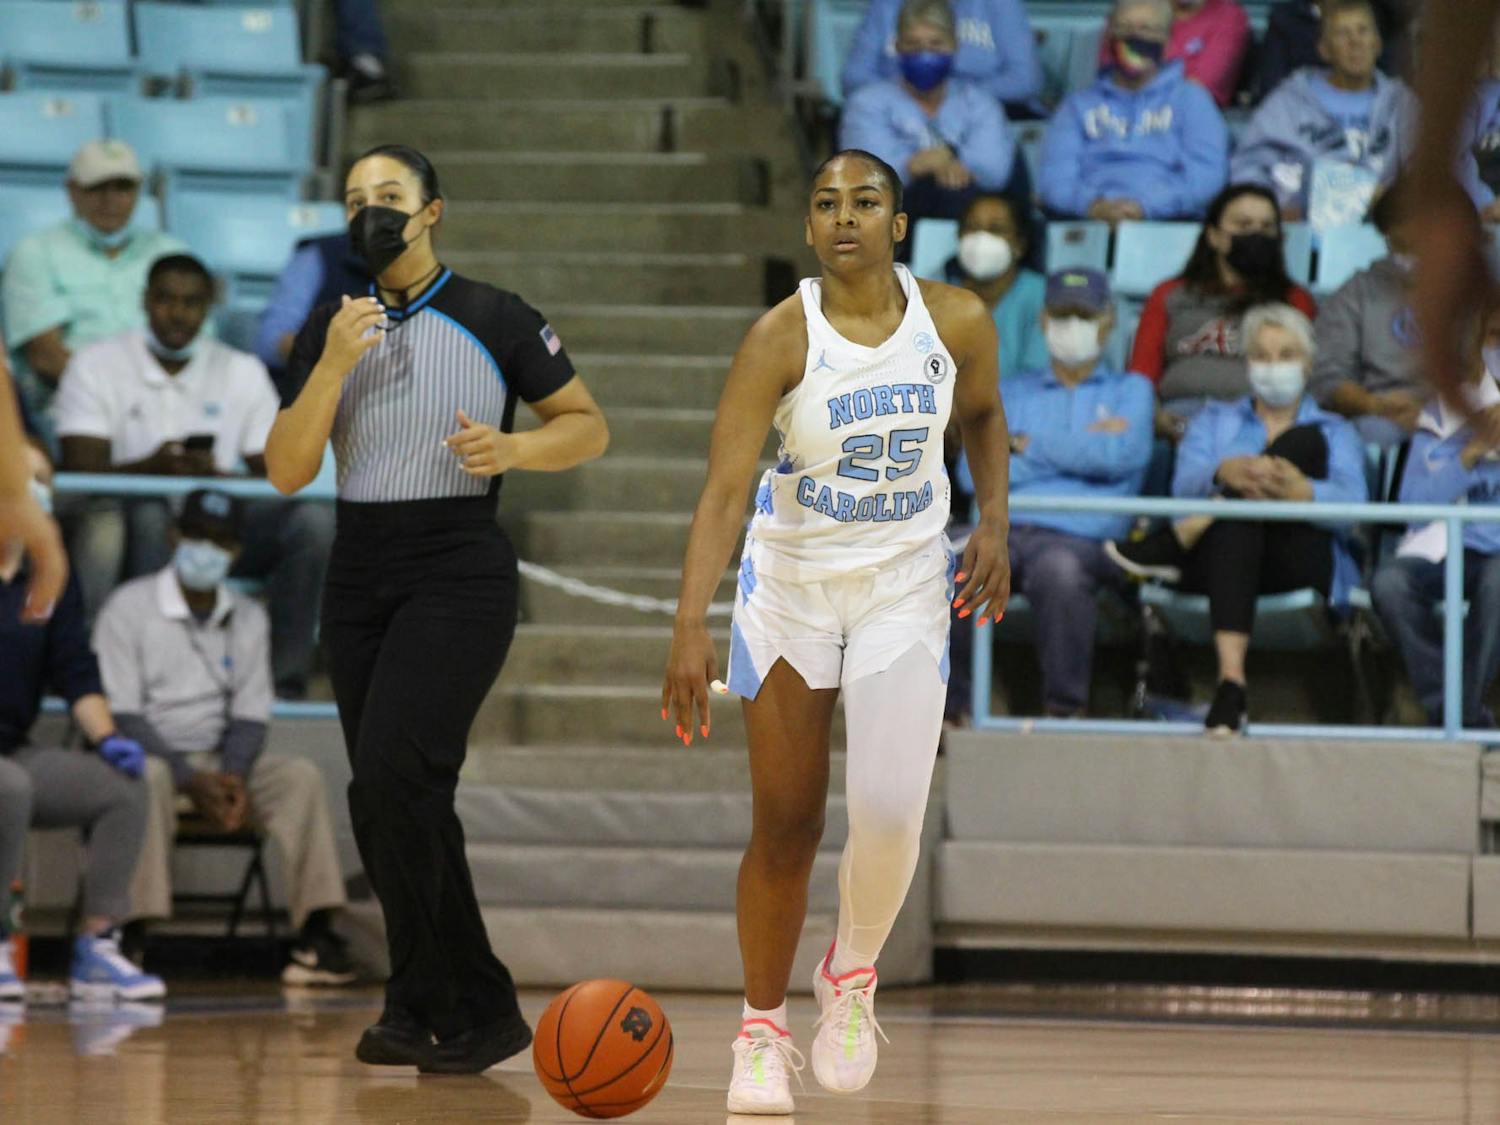 Sophomore Deja Kelly takes the ball down the court against James Madison University on Dec. 5, 2021. The Tar Heels won 93-47.